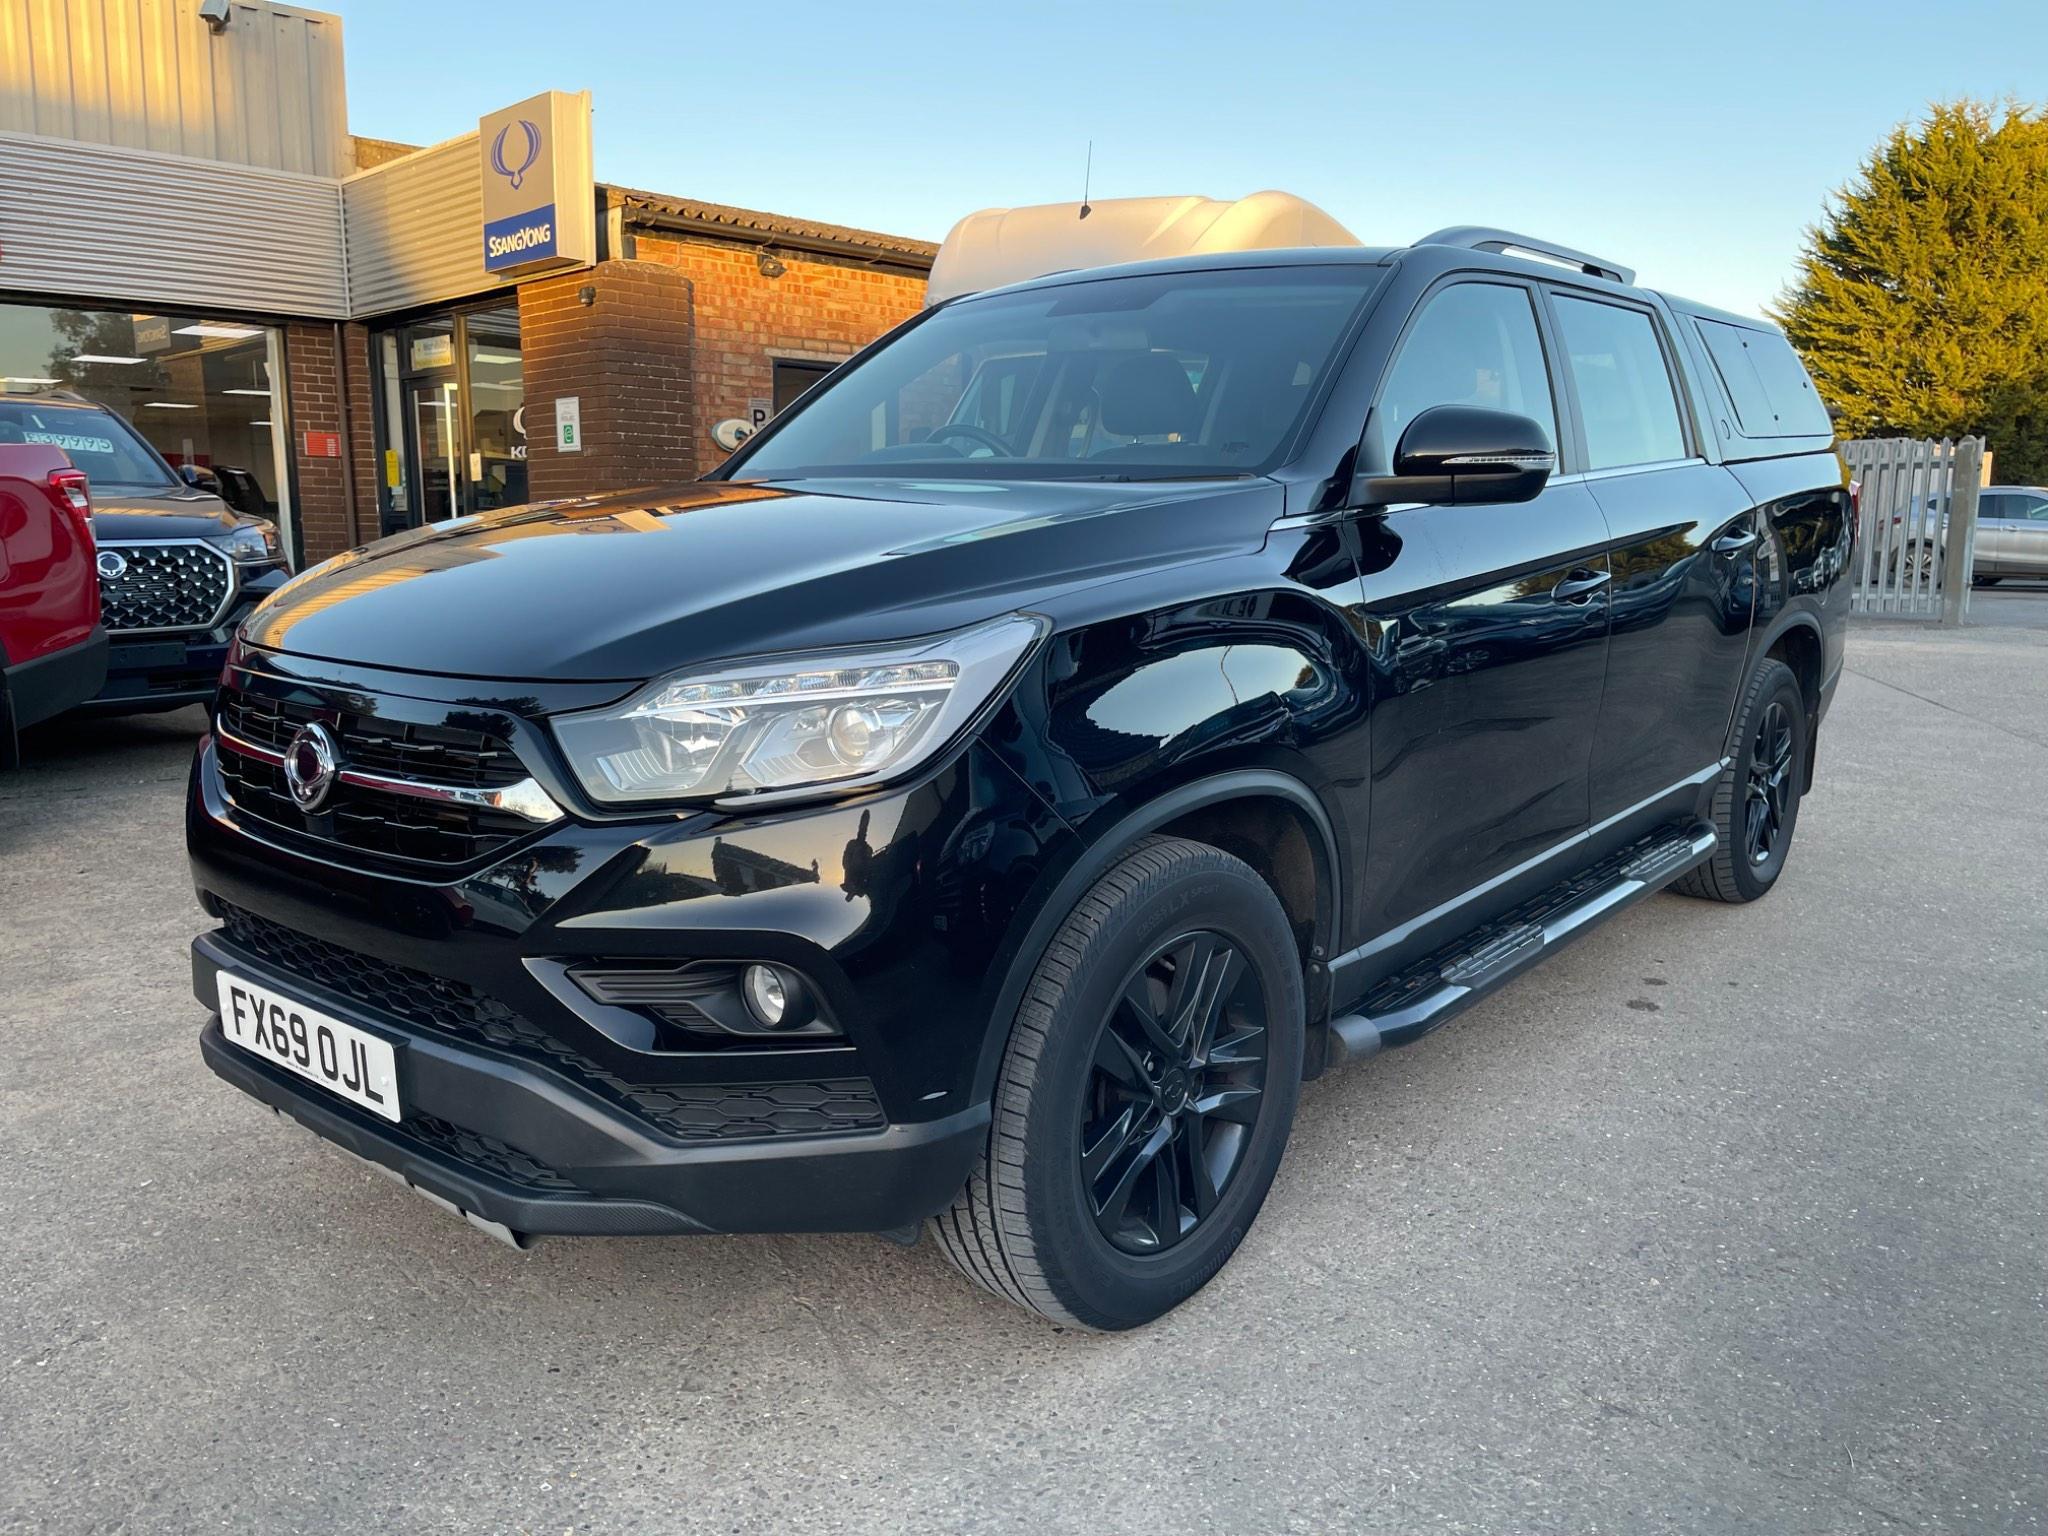 2019 SsangYong Musso